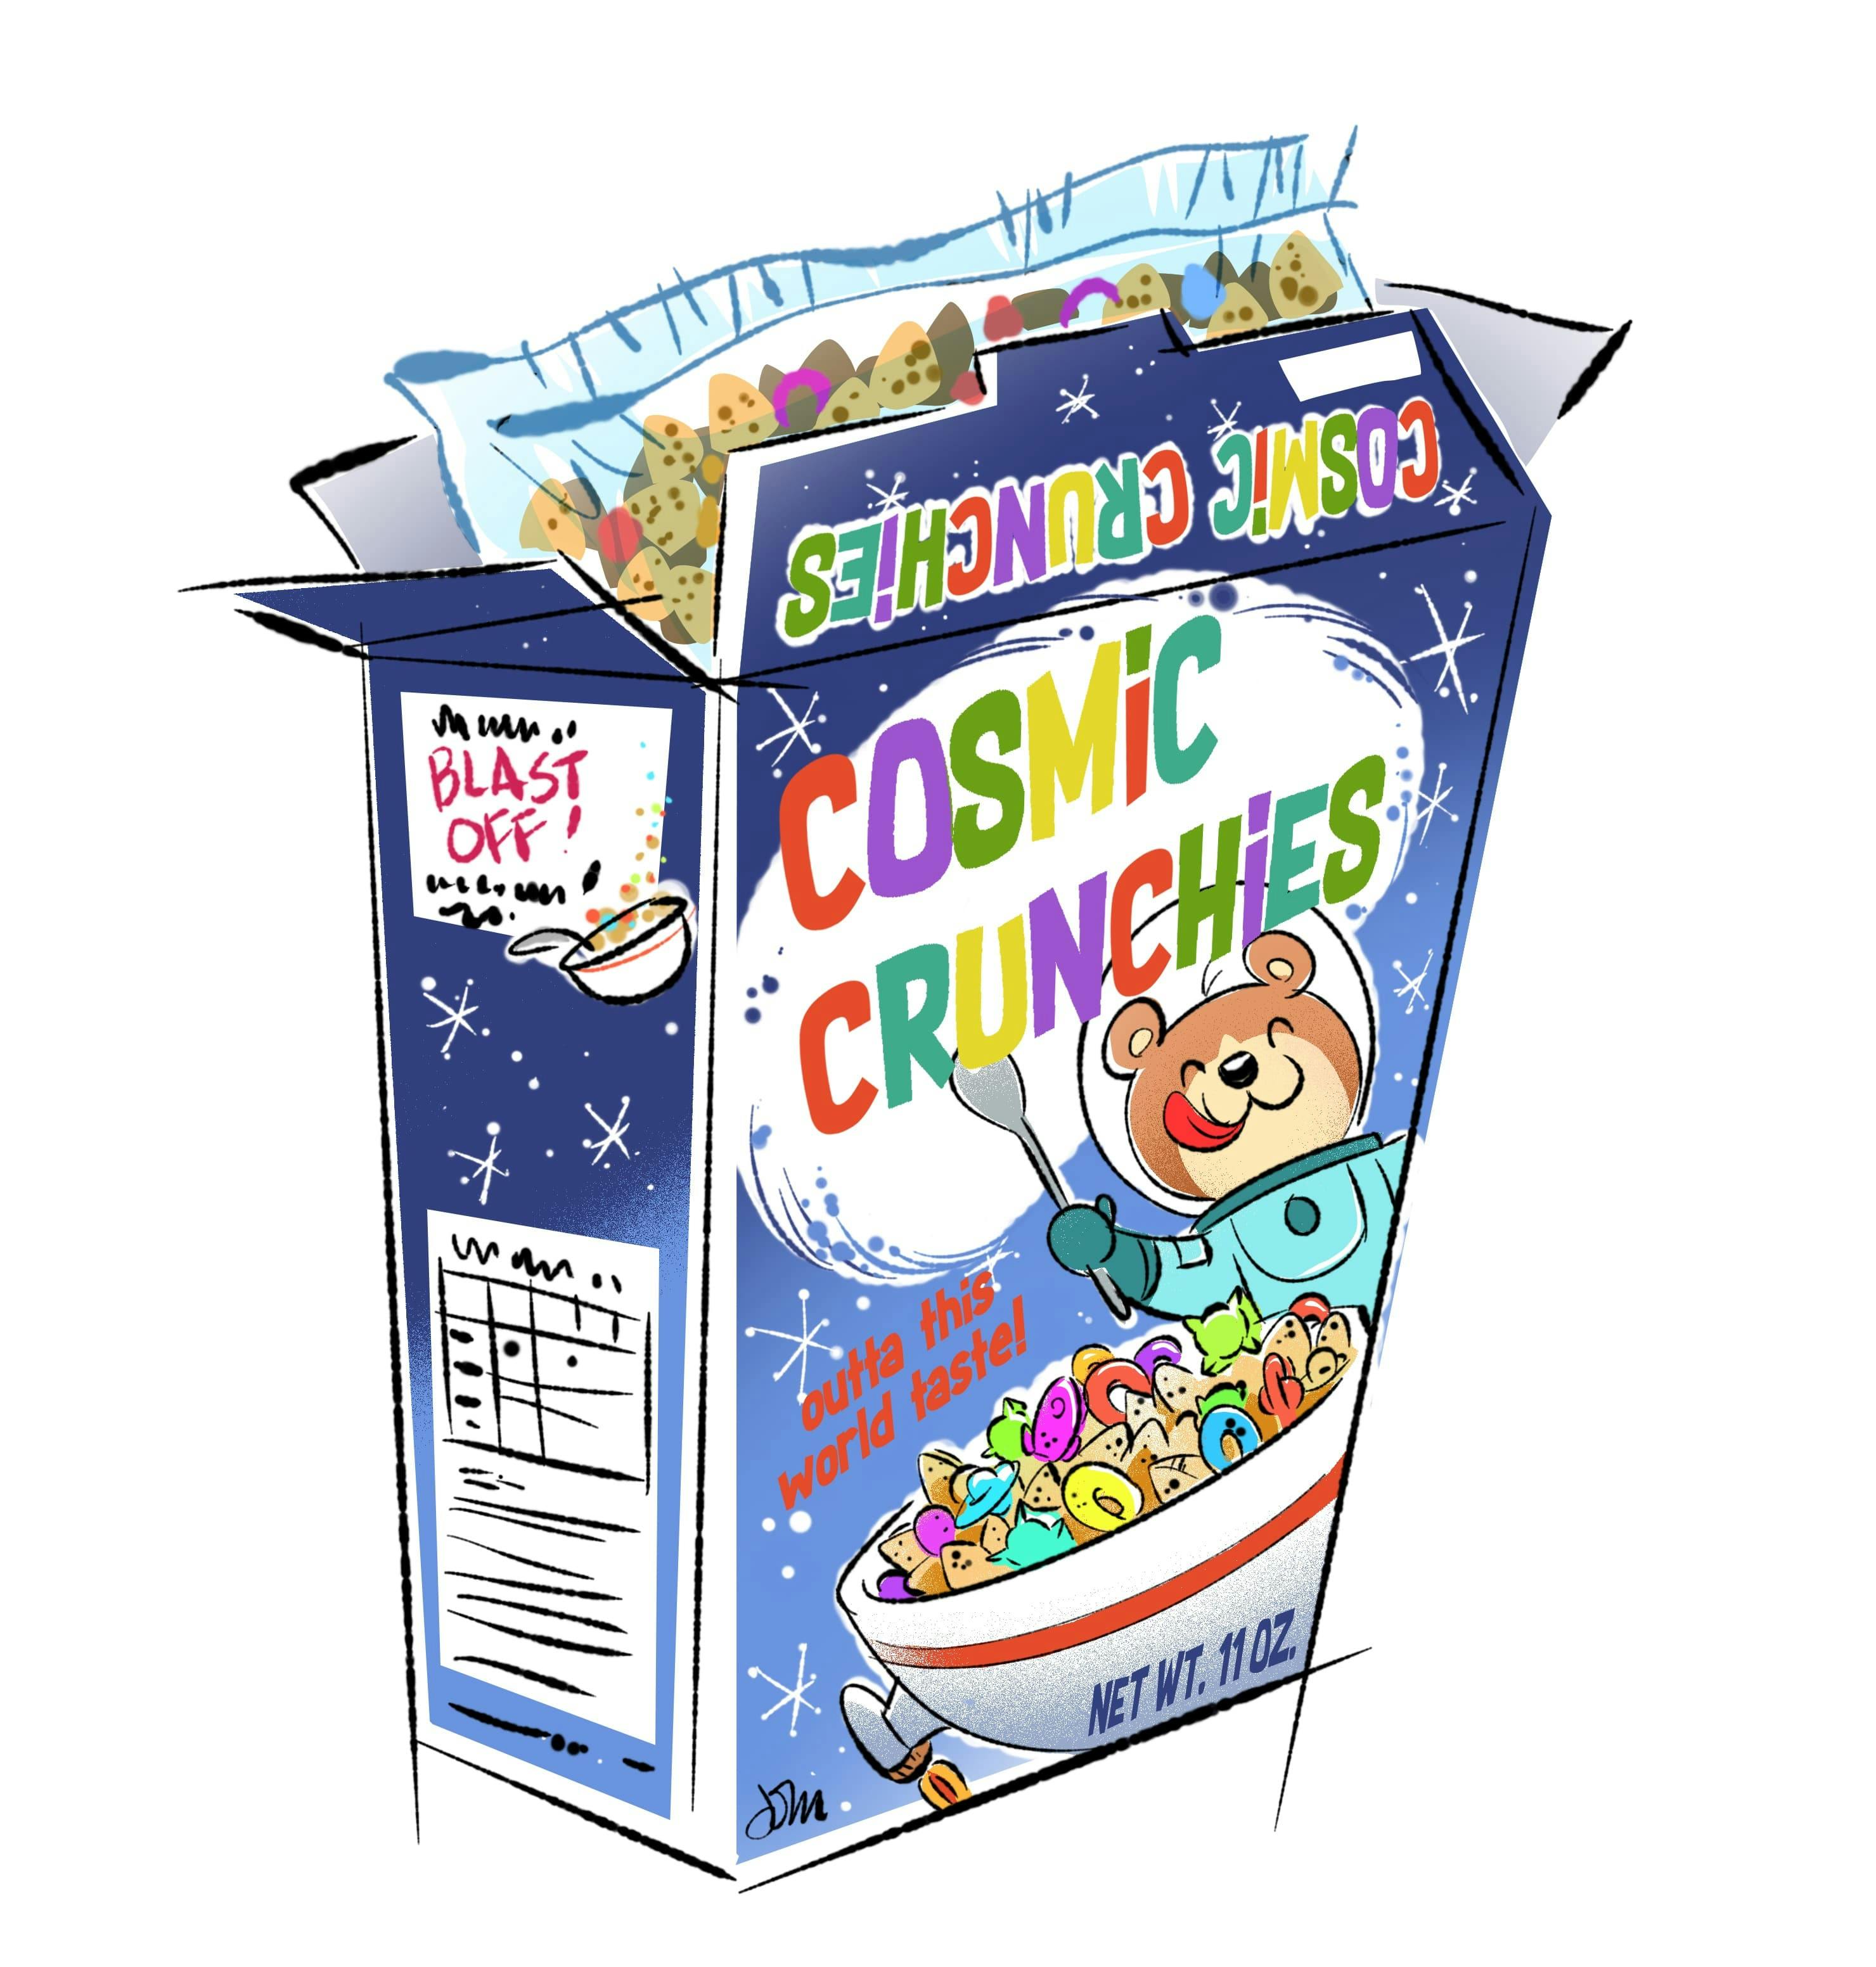 A box of Cosmic Crunchies ceral